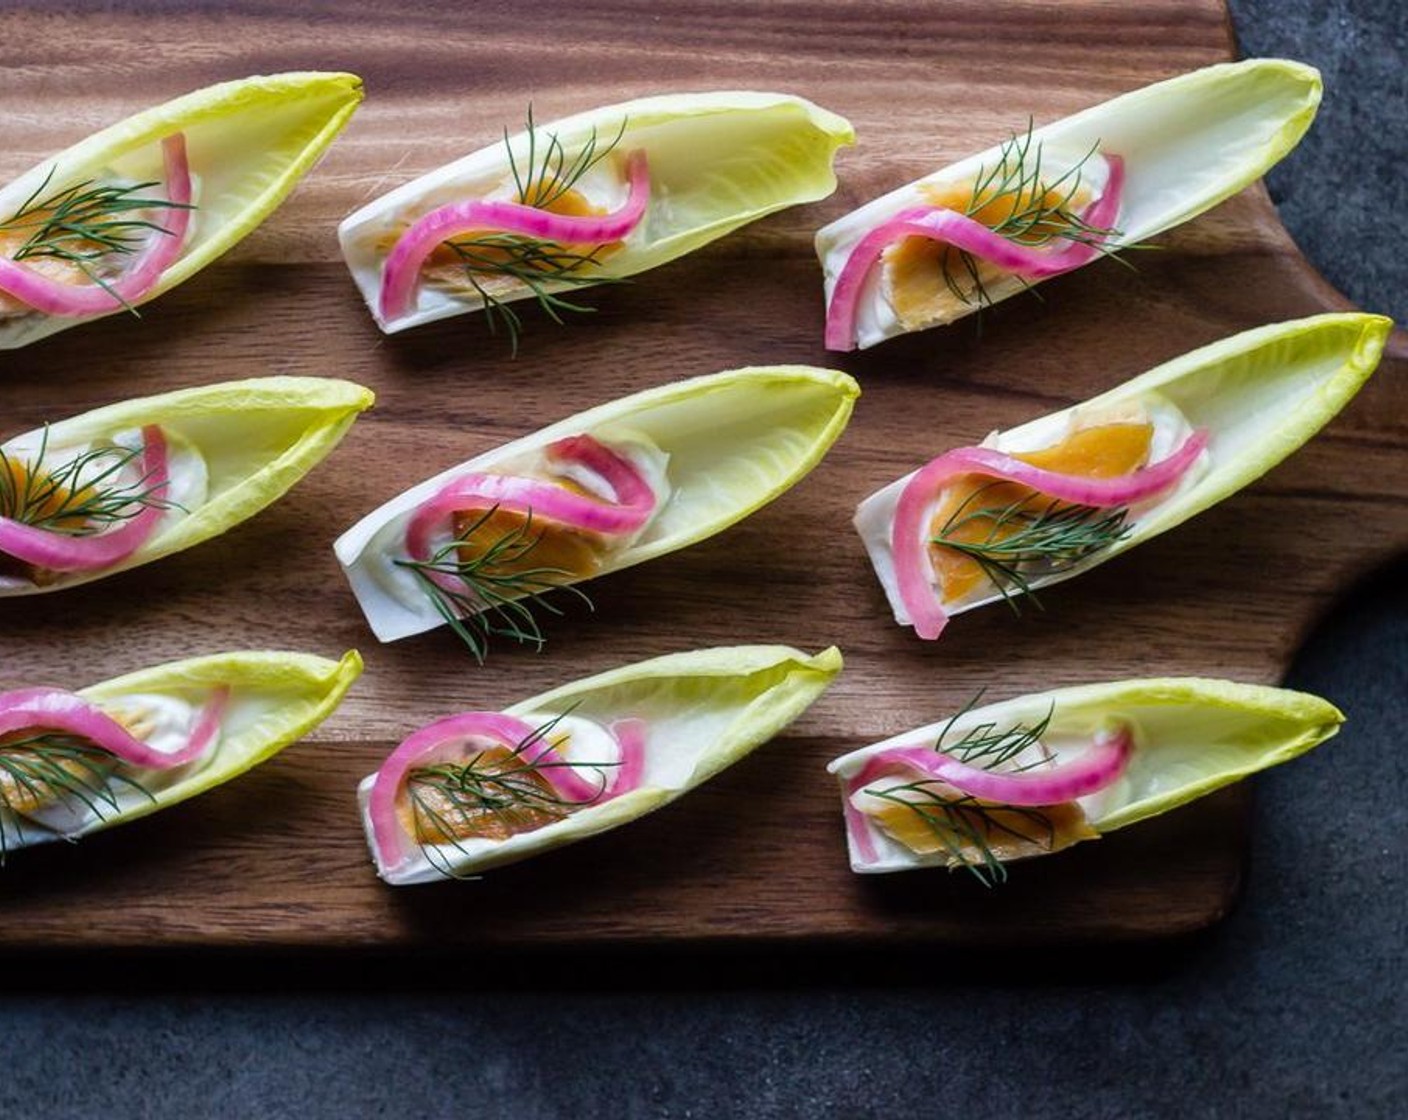 Endive with Whipped Goat Cheese and Smoked Trout